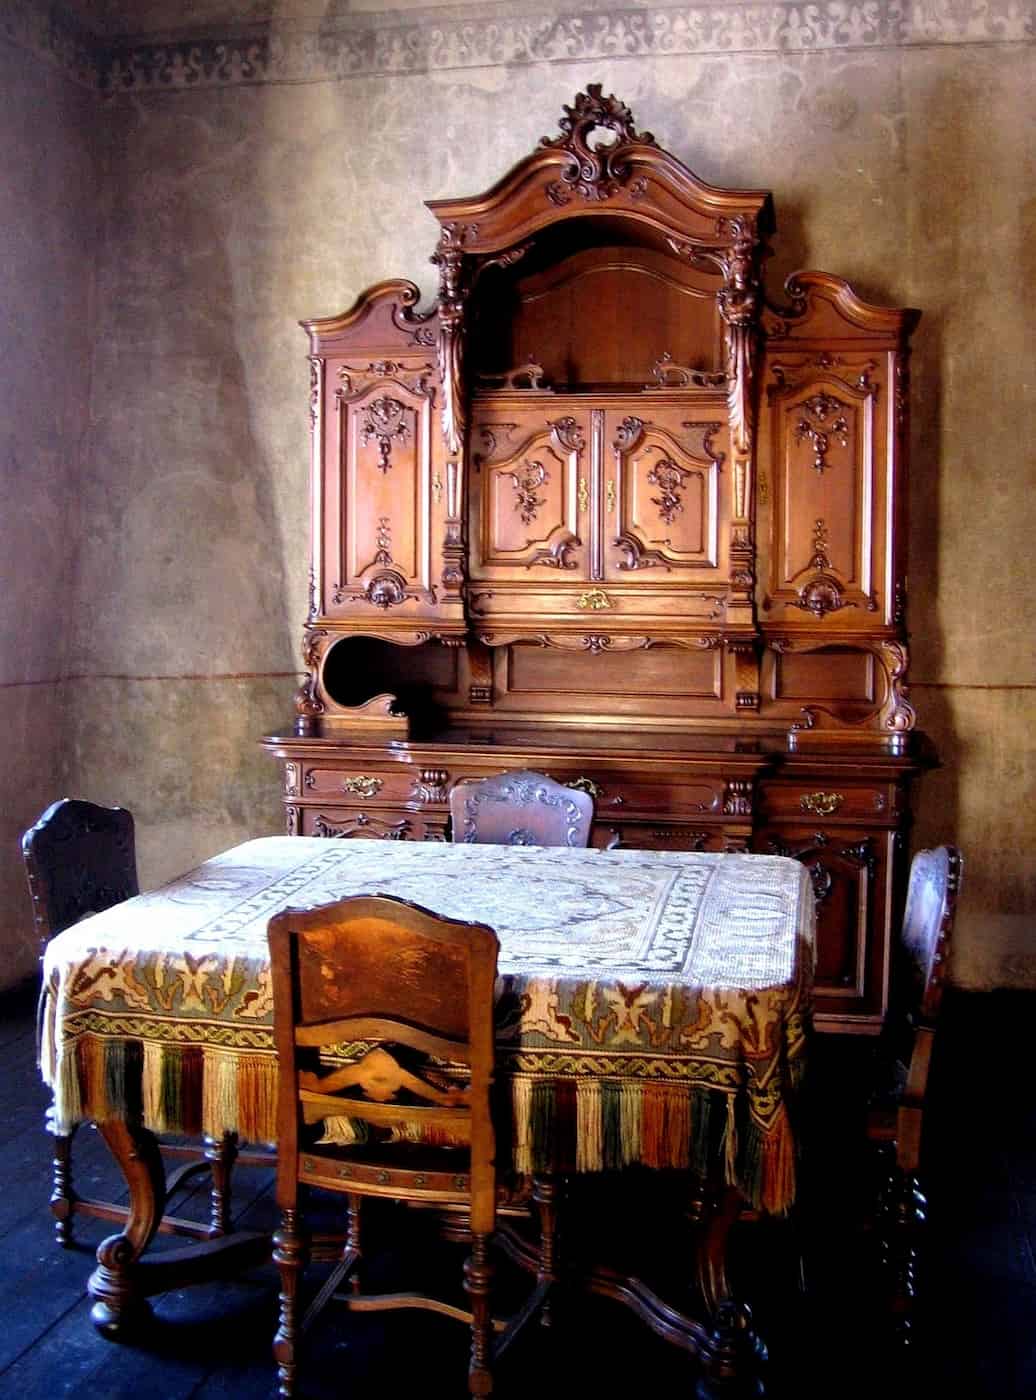 How To Tell if Old Furniture Is Valuable